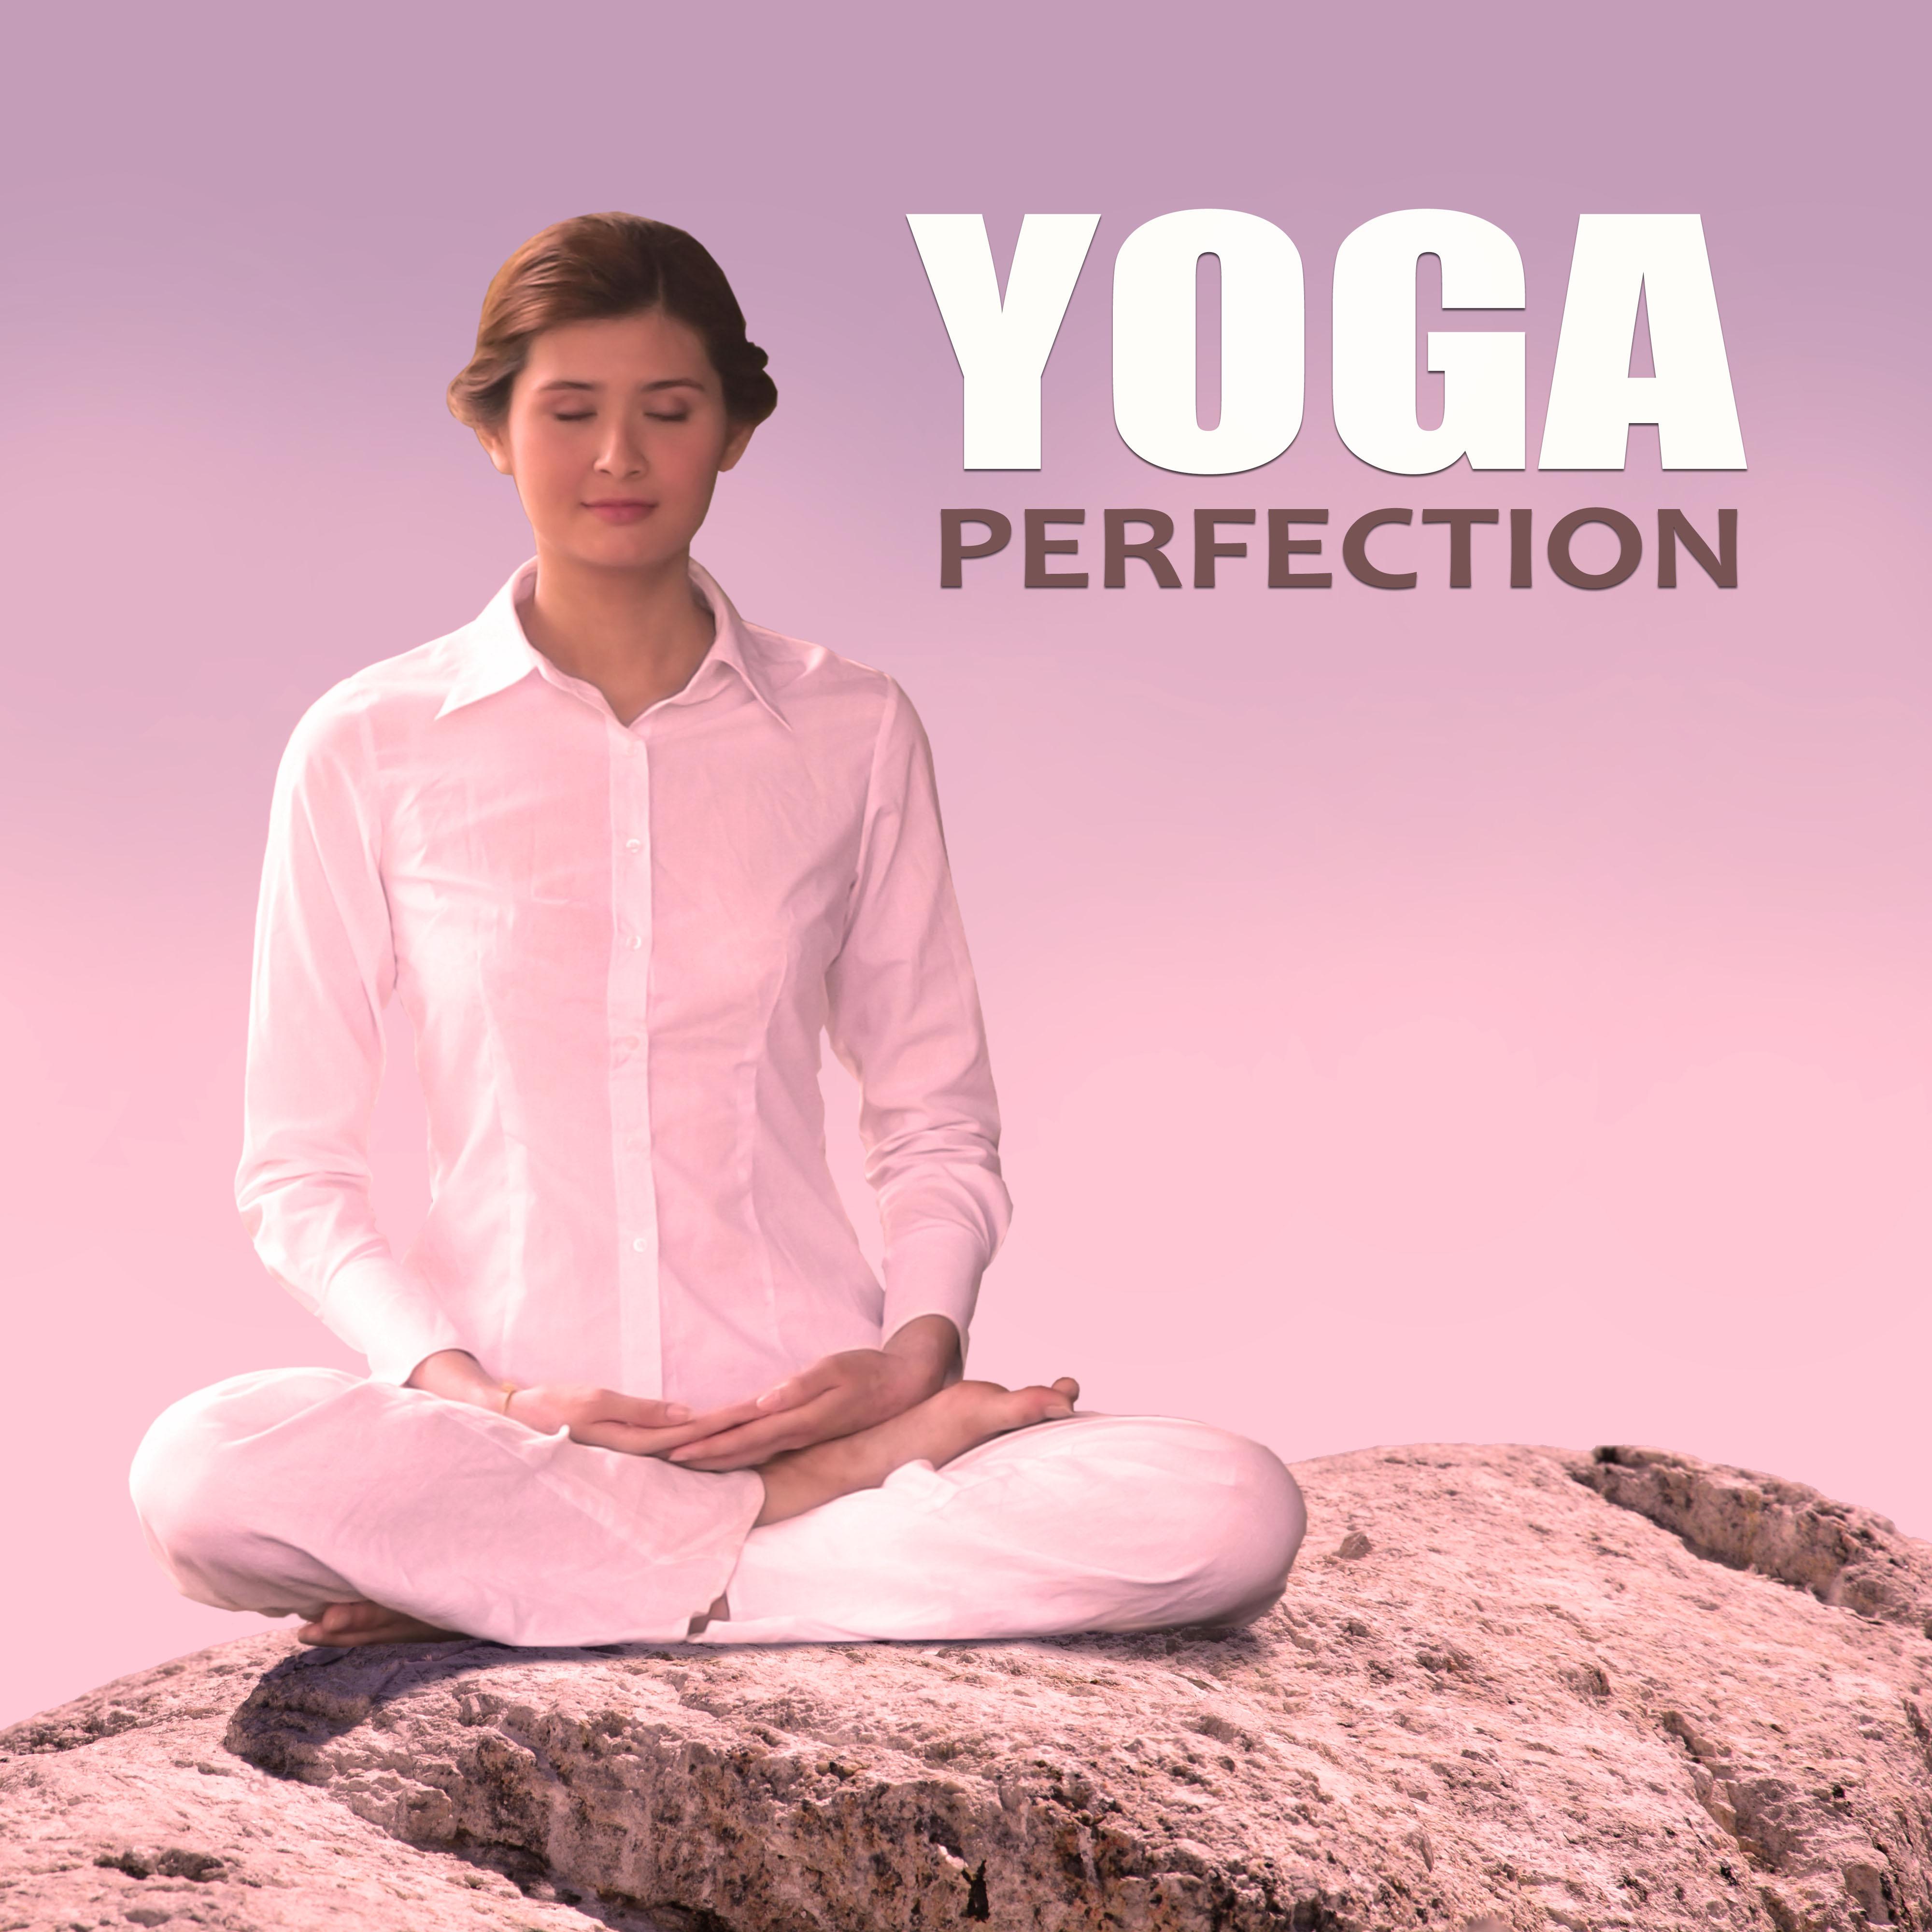 Yoga Perfection - Relaxing Nature Sounds, Deep Meditation, Yoga Poses, Harmony of Senses, Stress Relief, Ocean Waves